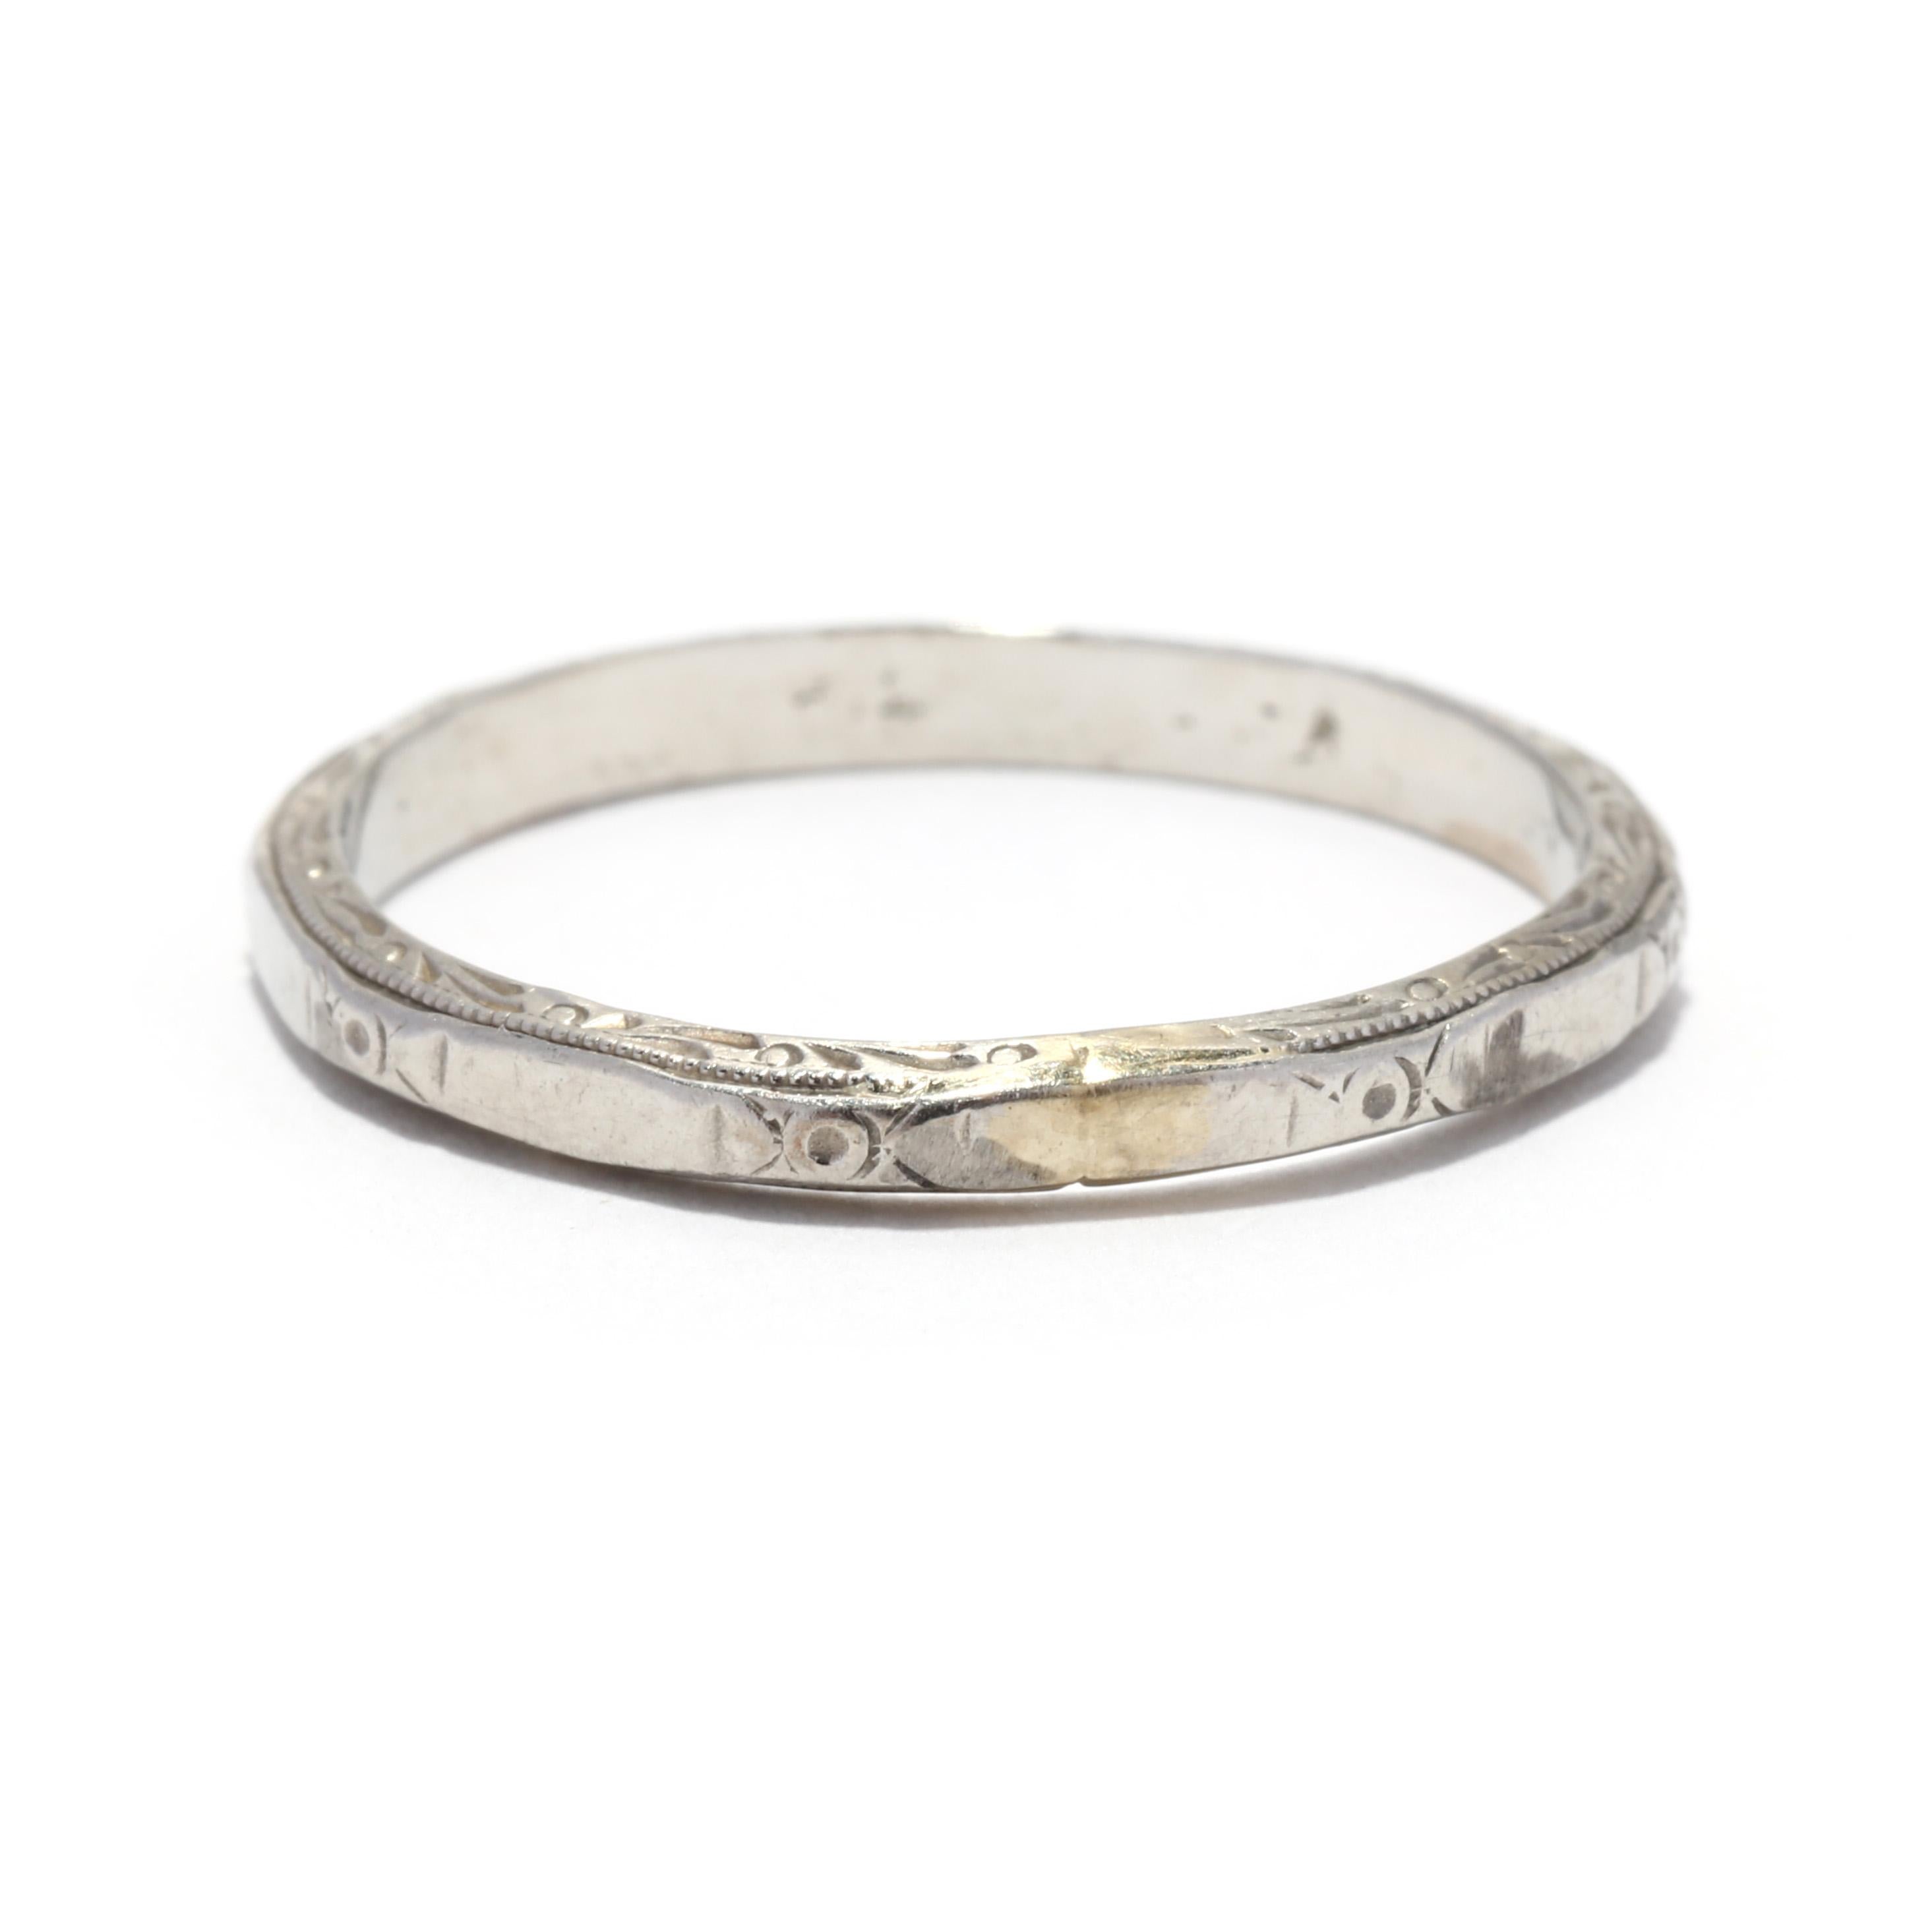 An Art Deco 18 karat white gold engraved wedding band. This stackable band features alternating floral engraved stations with polished plain stations in an eternity design. Please note that there is evidence of sizing.

Ring Size 7.75

Width: 2.3